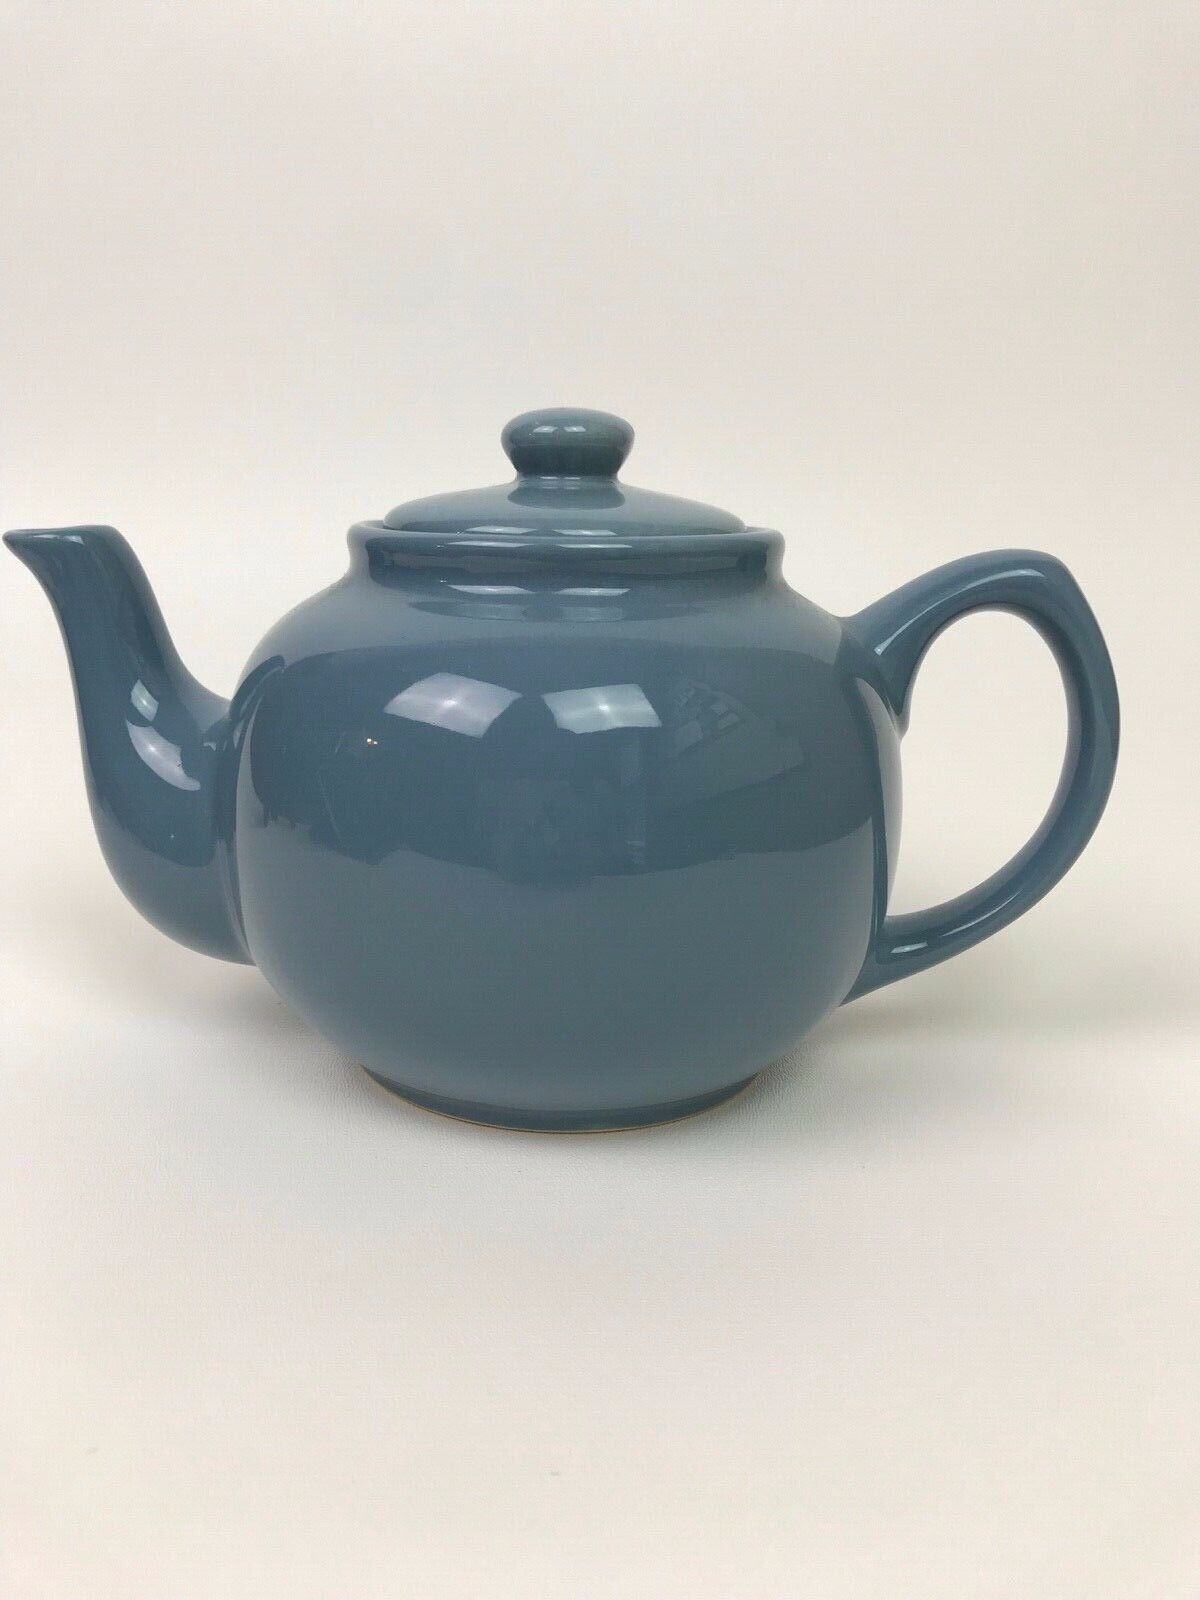 Chance Hold Pottery Blue TeaPot Water Pot Blue Ceramic Made in Taiwan